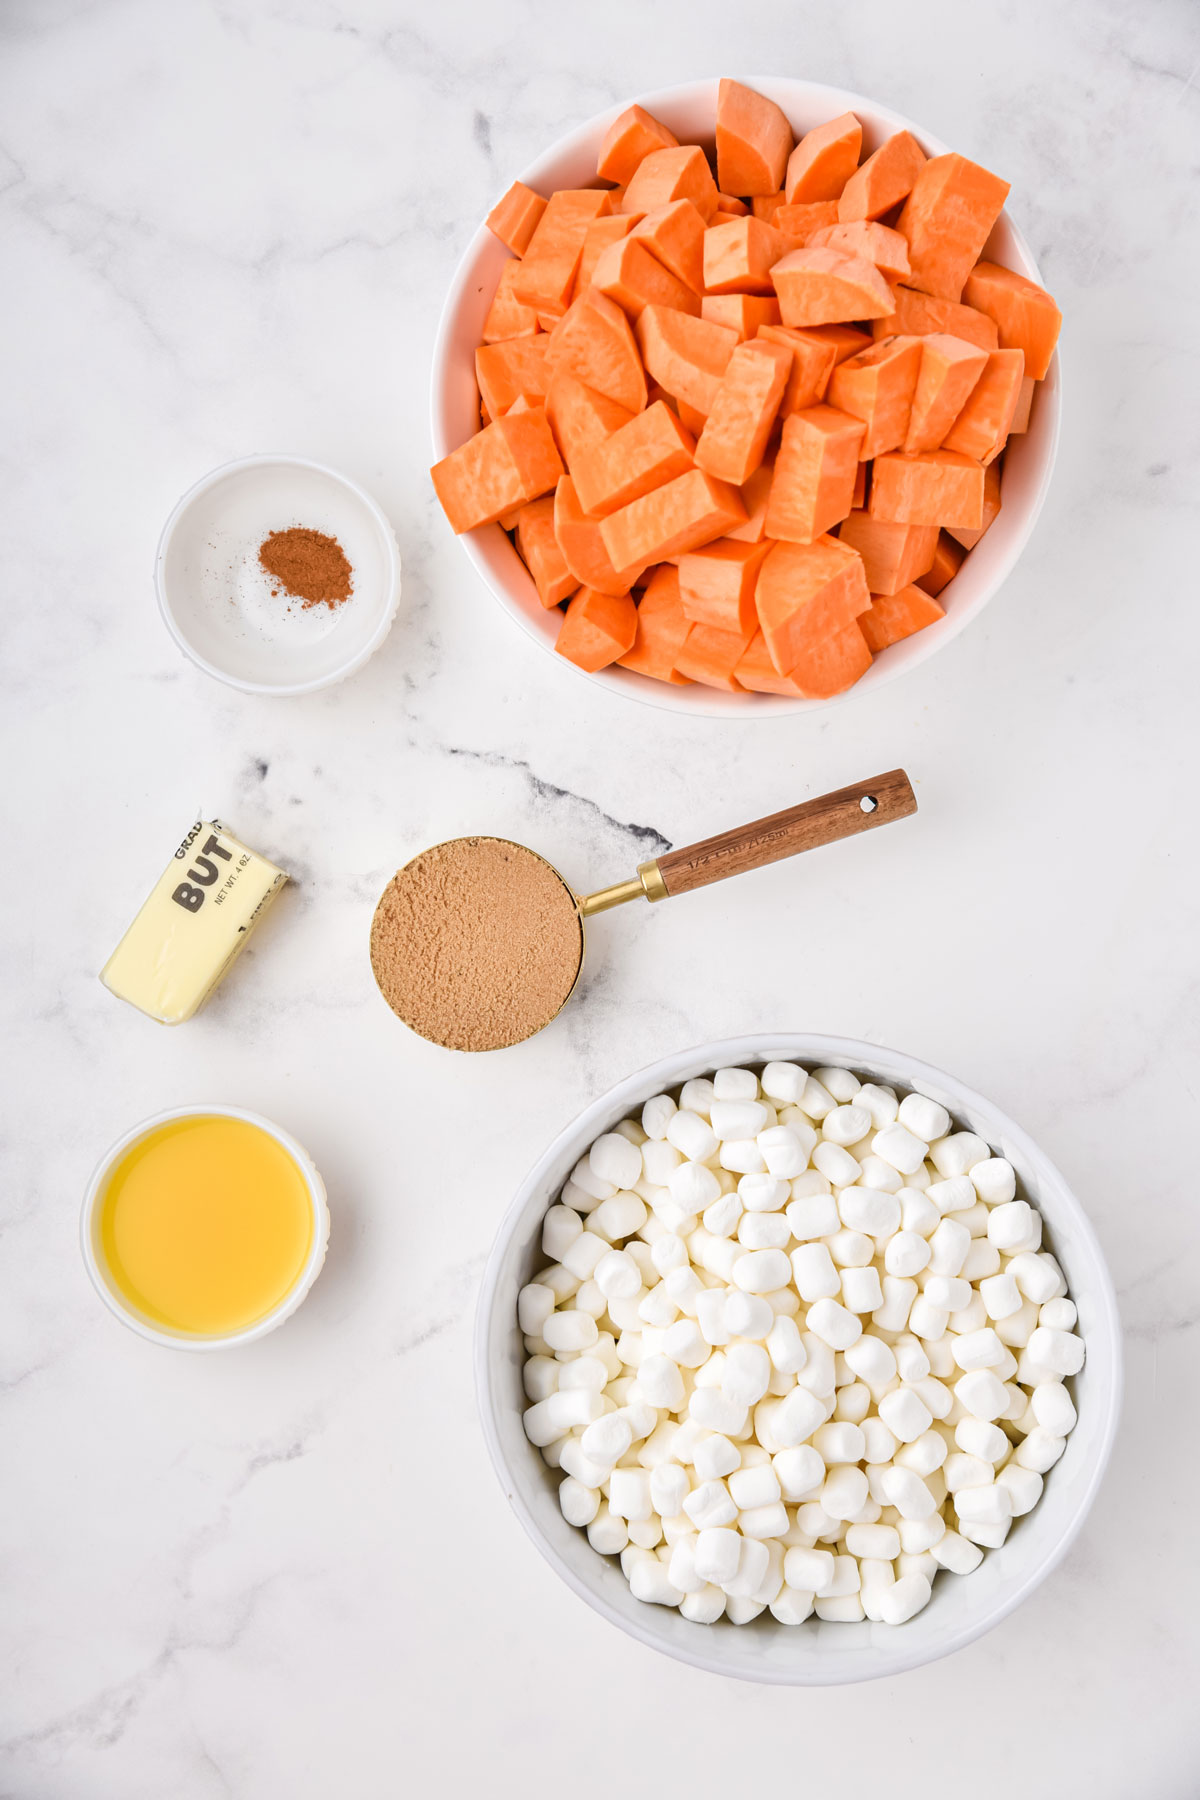 Ingredients for Sweet Potato Casserole with Marshmallows. These are the following: sweet potatoes, brown sugar, melted butter, orange juice, ground cinnamon, mini marshmallows